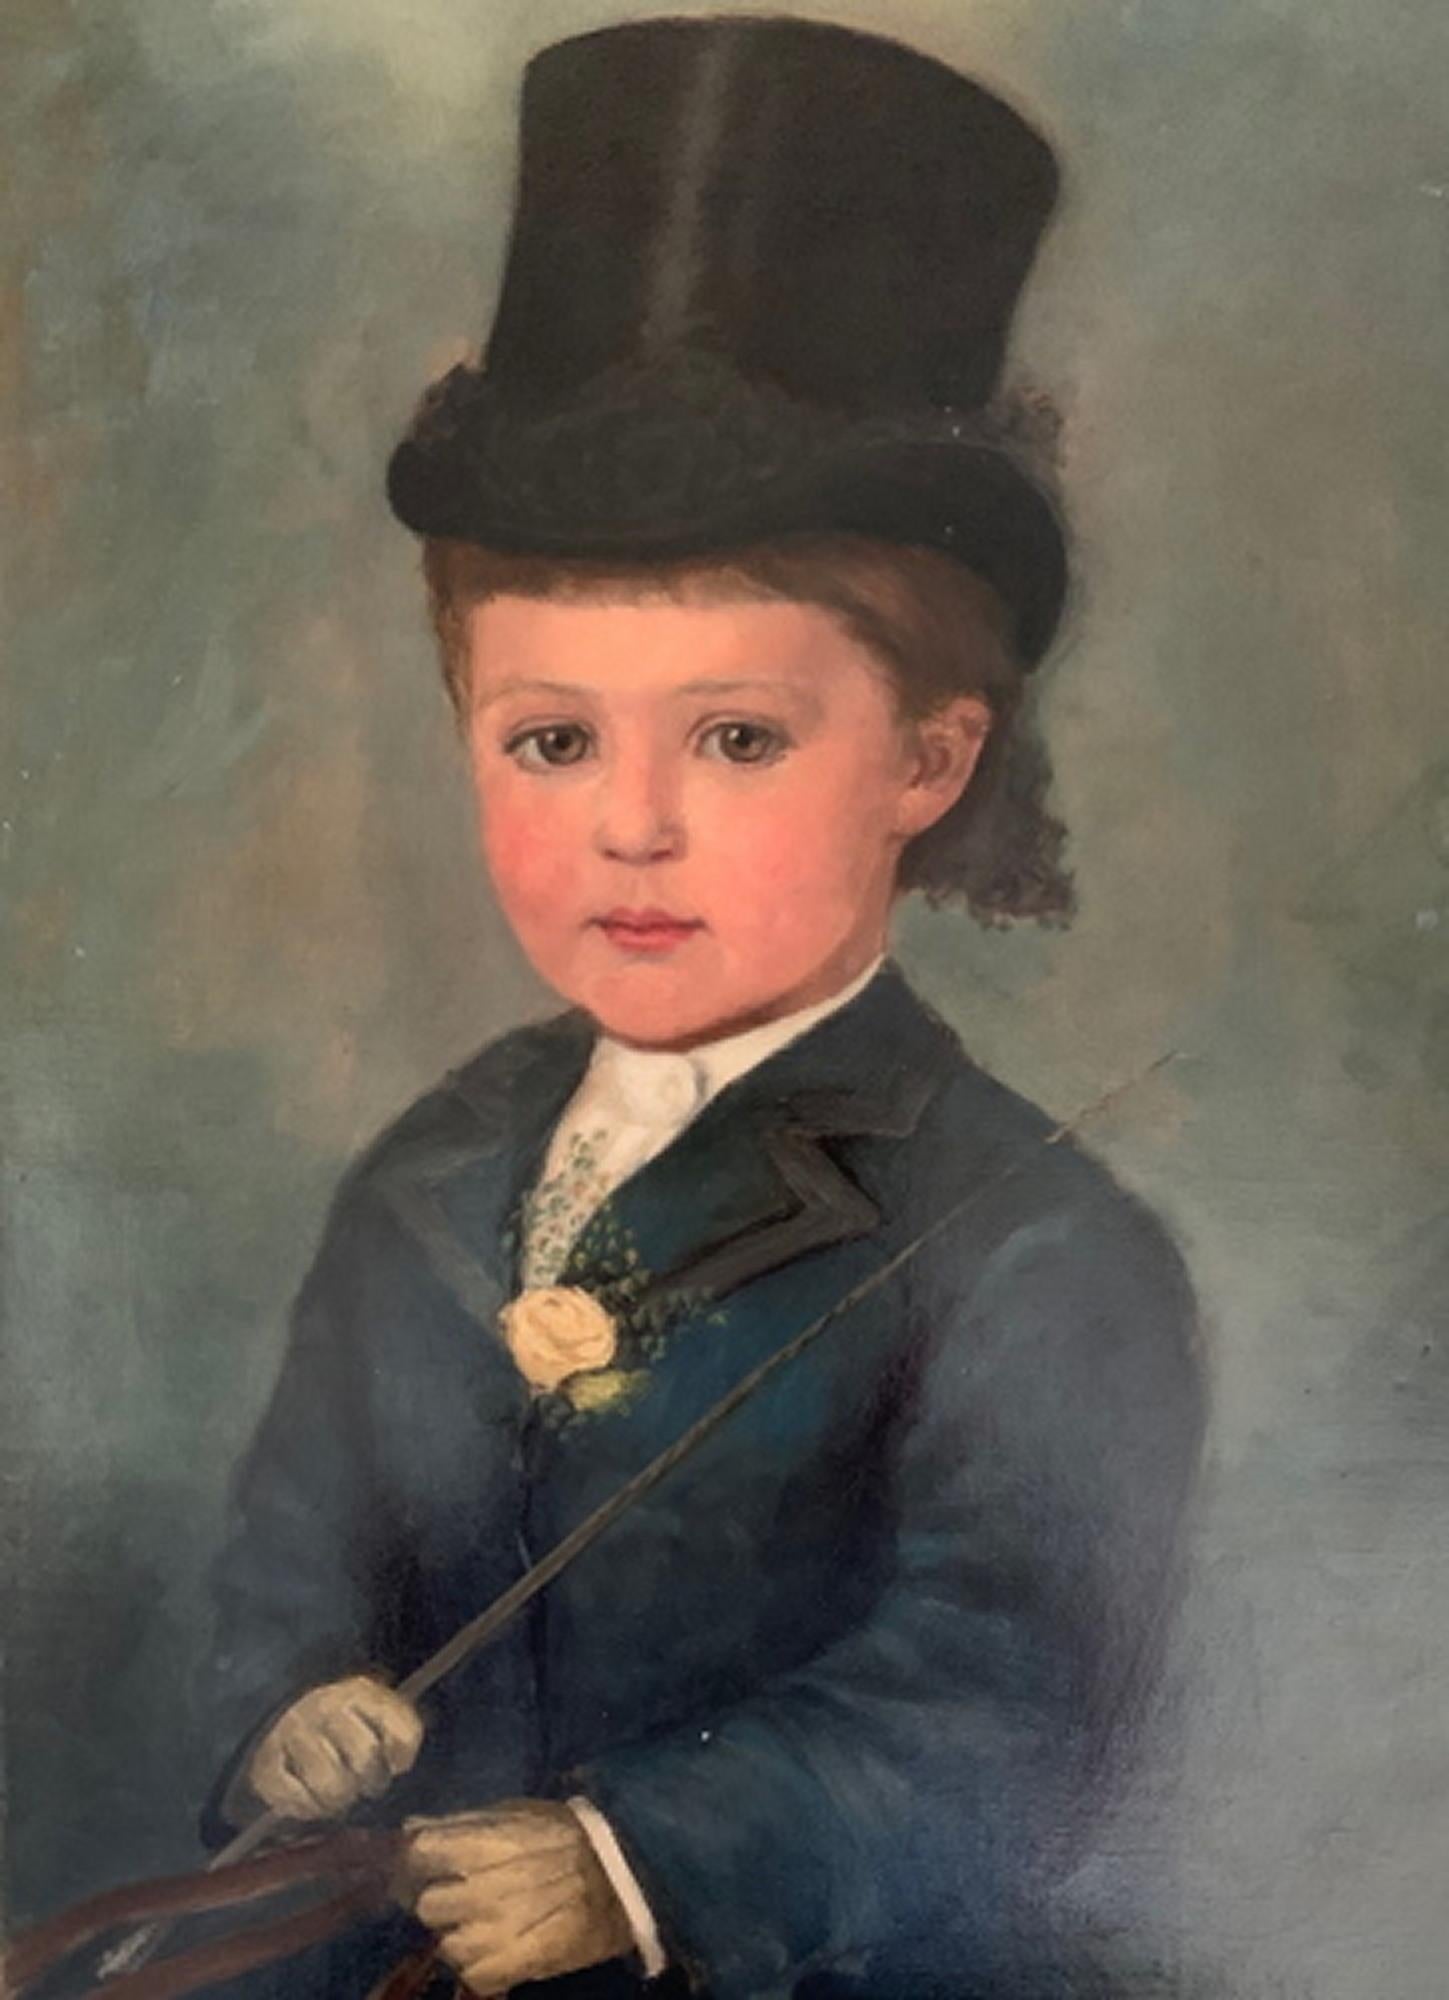 Miss Ethel Mortlock an oil on canvas called 'Town' of Marie Adelaide Brassey (aged 3) who became Marchioness of Willingdon (see below) and is buried in the Nave at Westminster Abbey, signed and dated 1878. Picture 60 x 45 cm

Ethel Mortlock